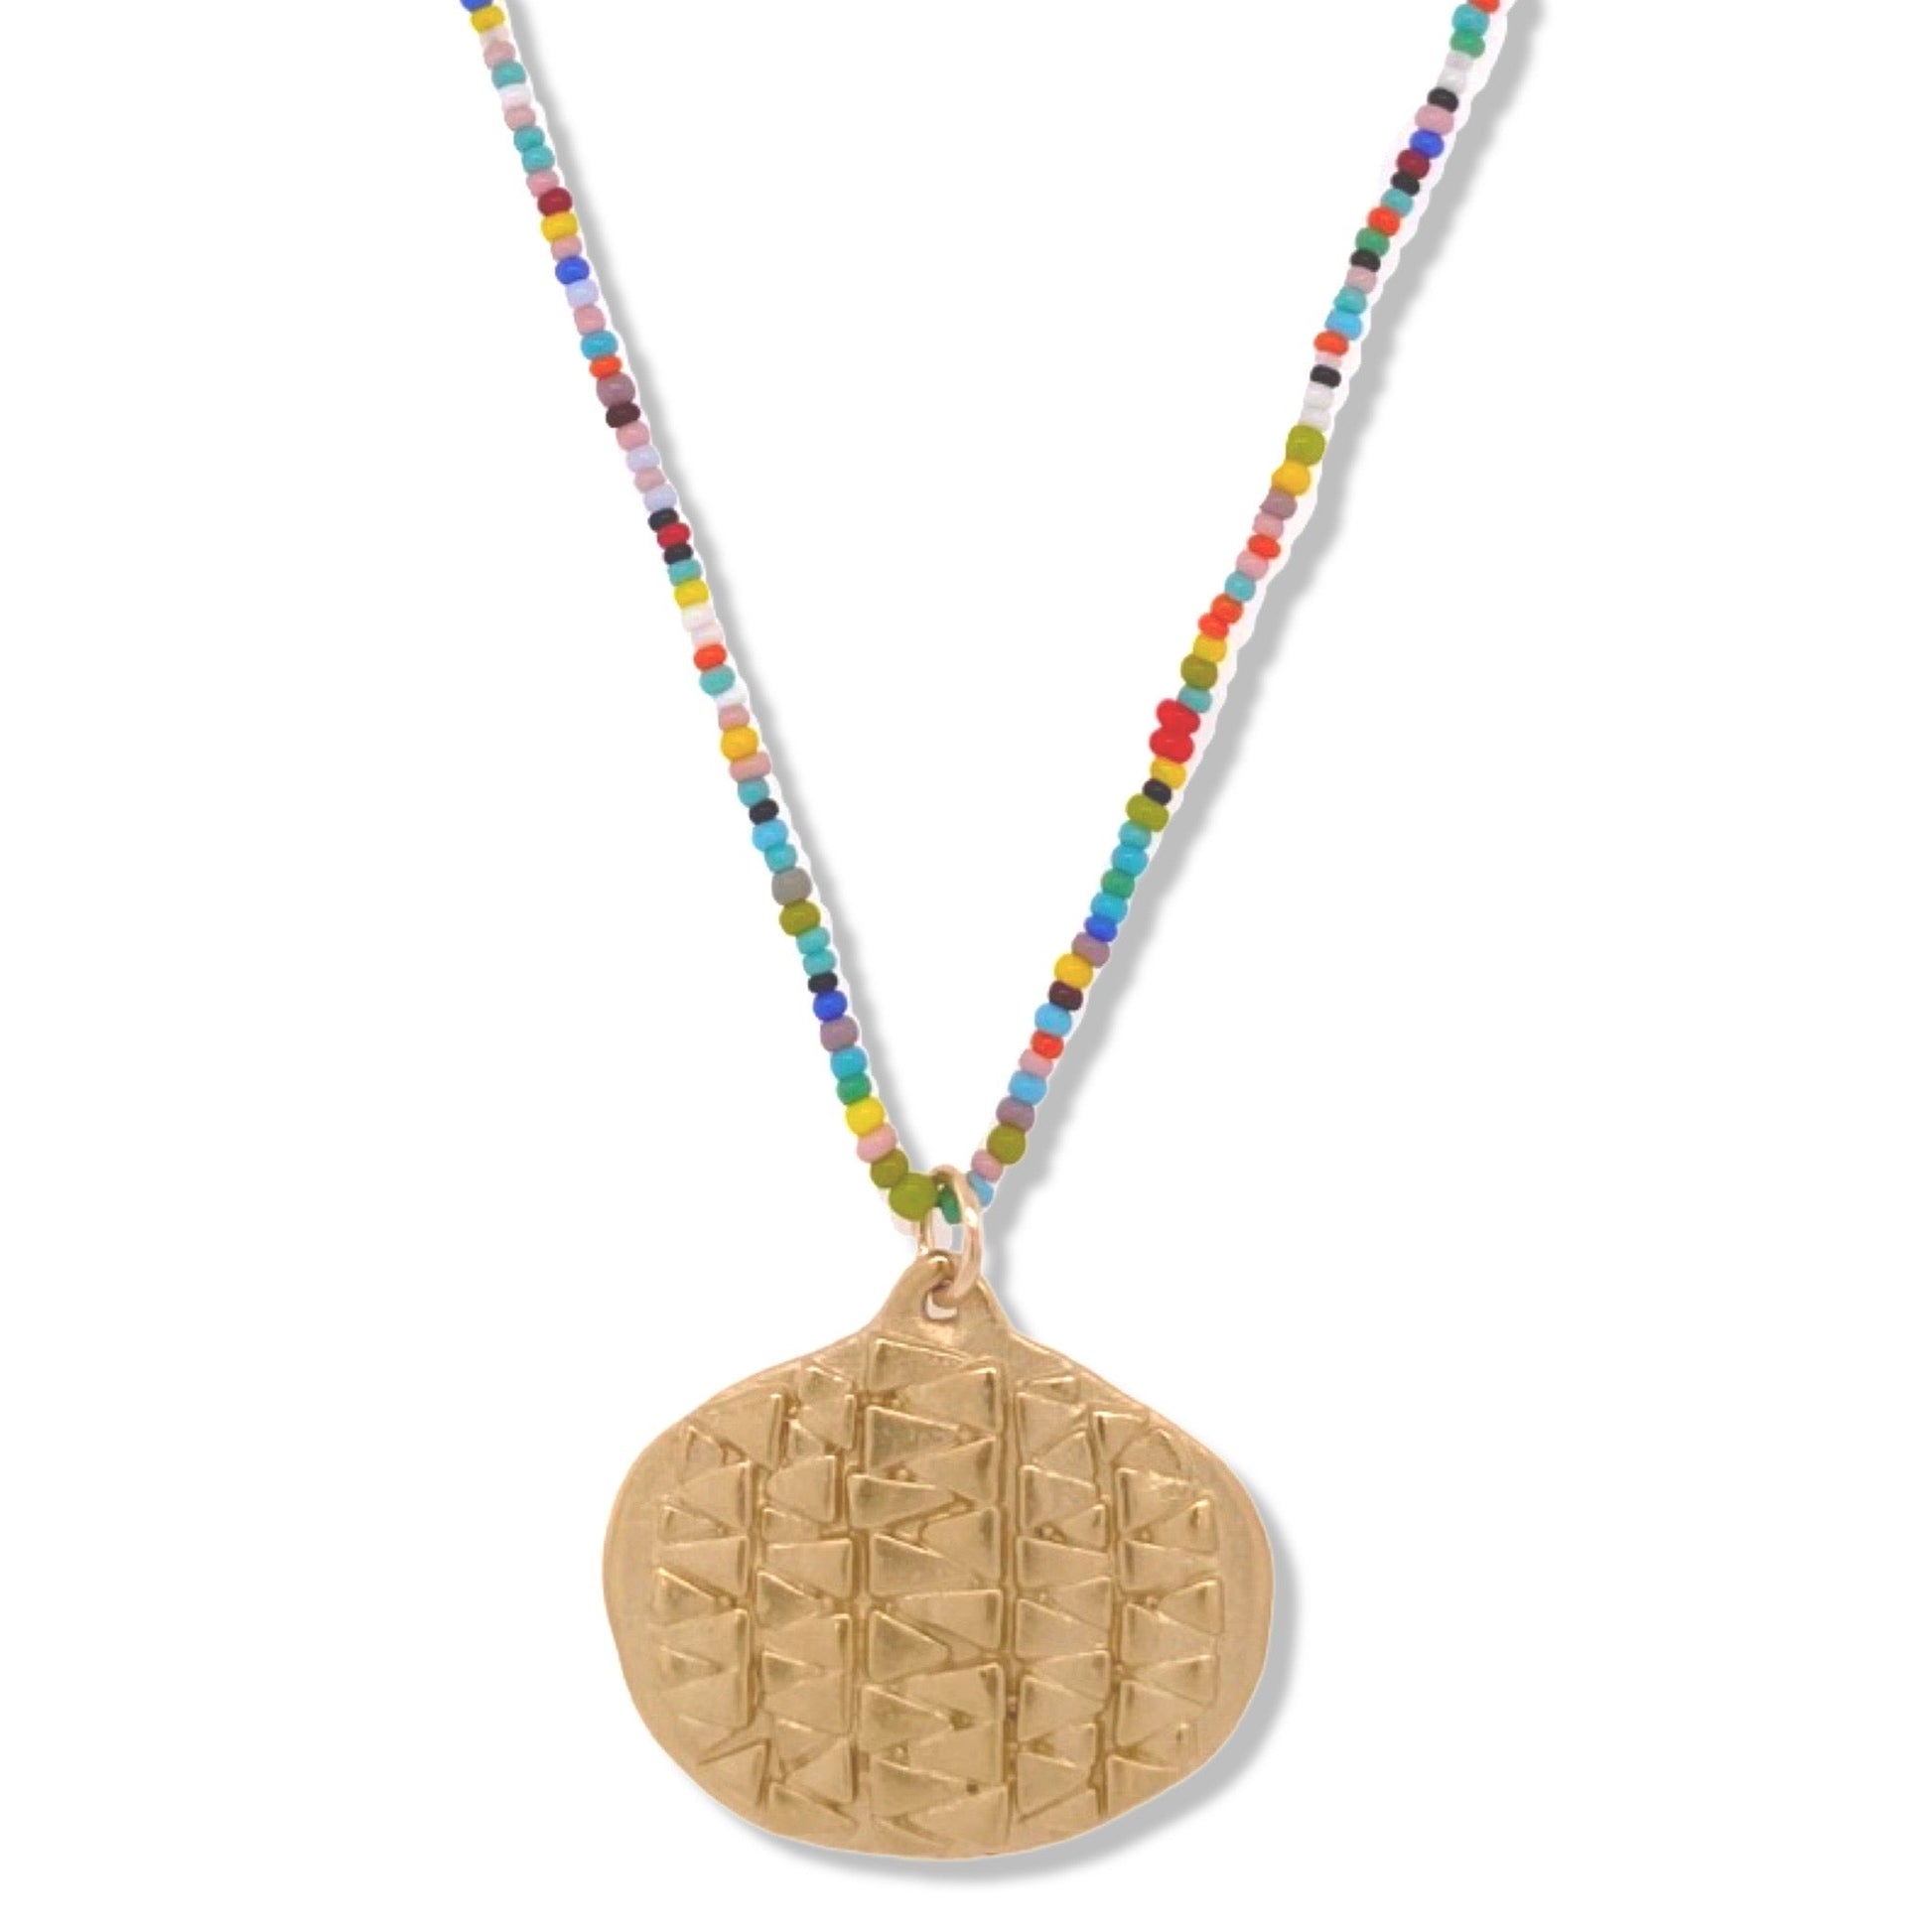 Tribal Wide Oval Necklace in Gold on multi Color Tiny Beads | Nalu | Nantucket